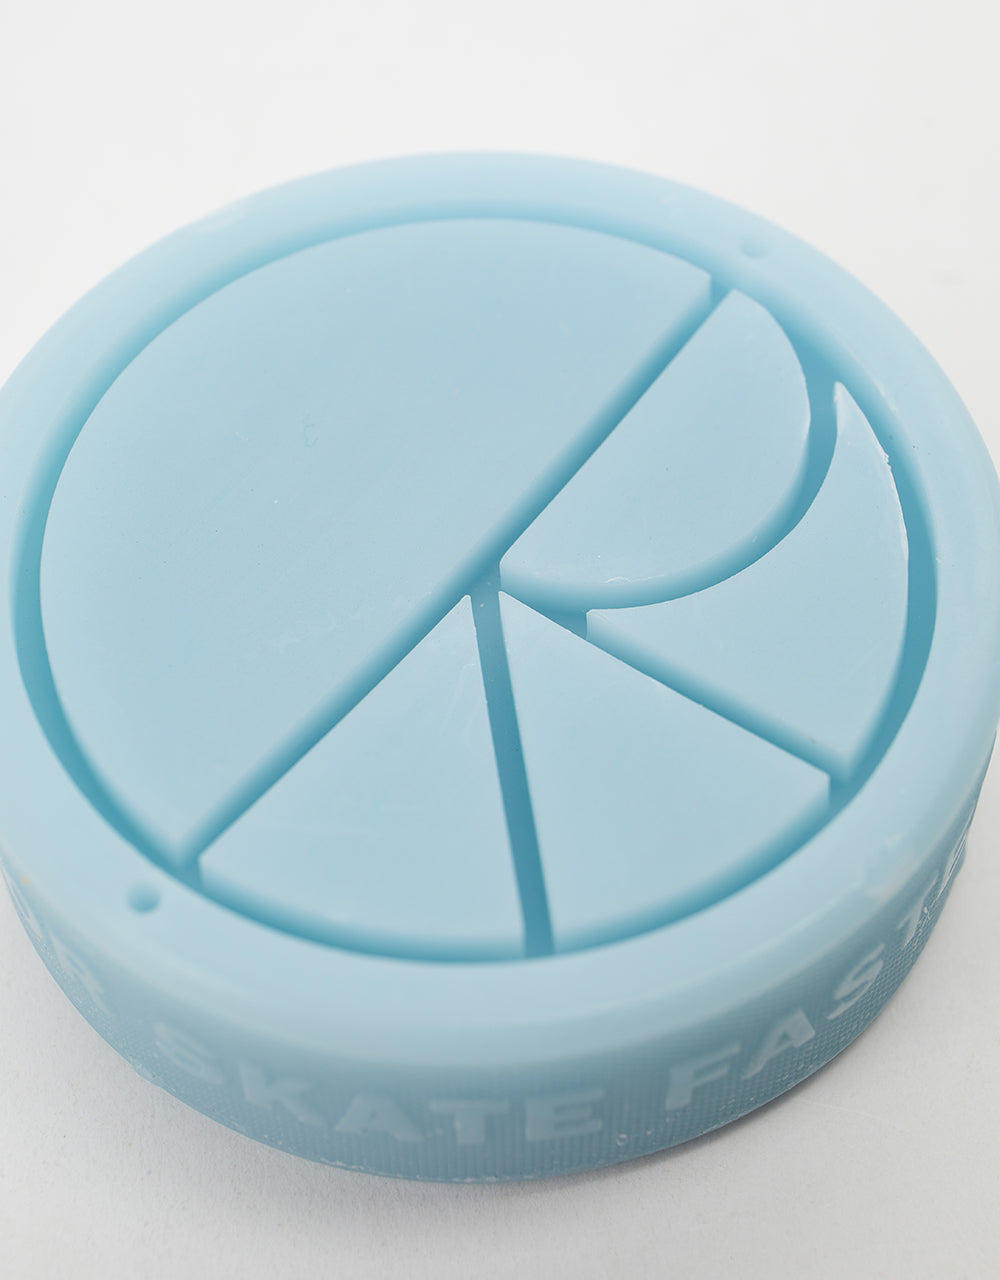 Polar Use Wisely or Skate Faster Wax - Light Blue